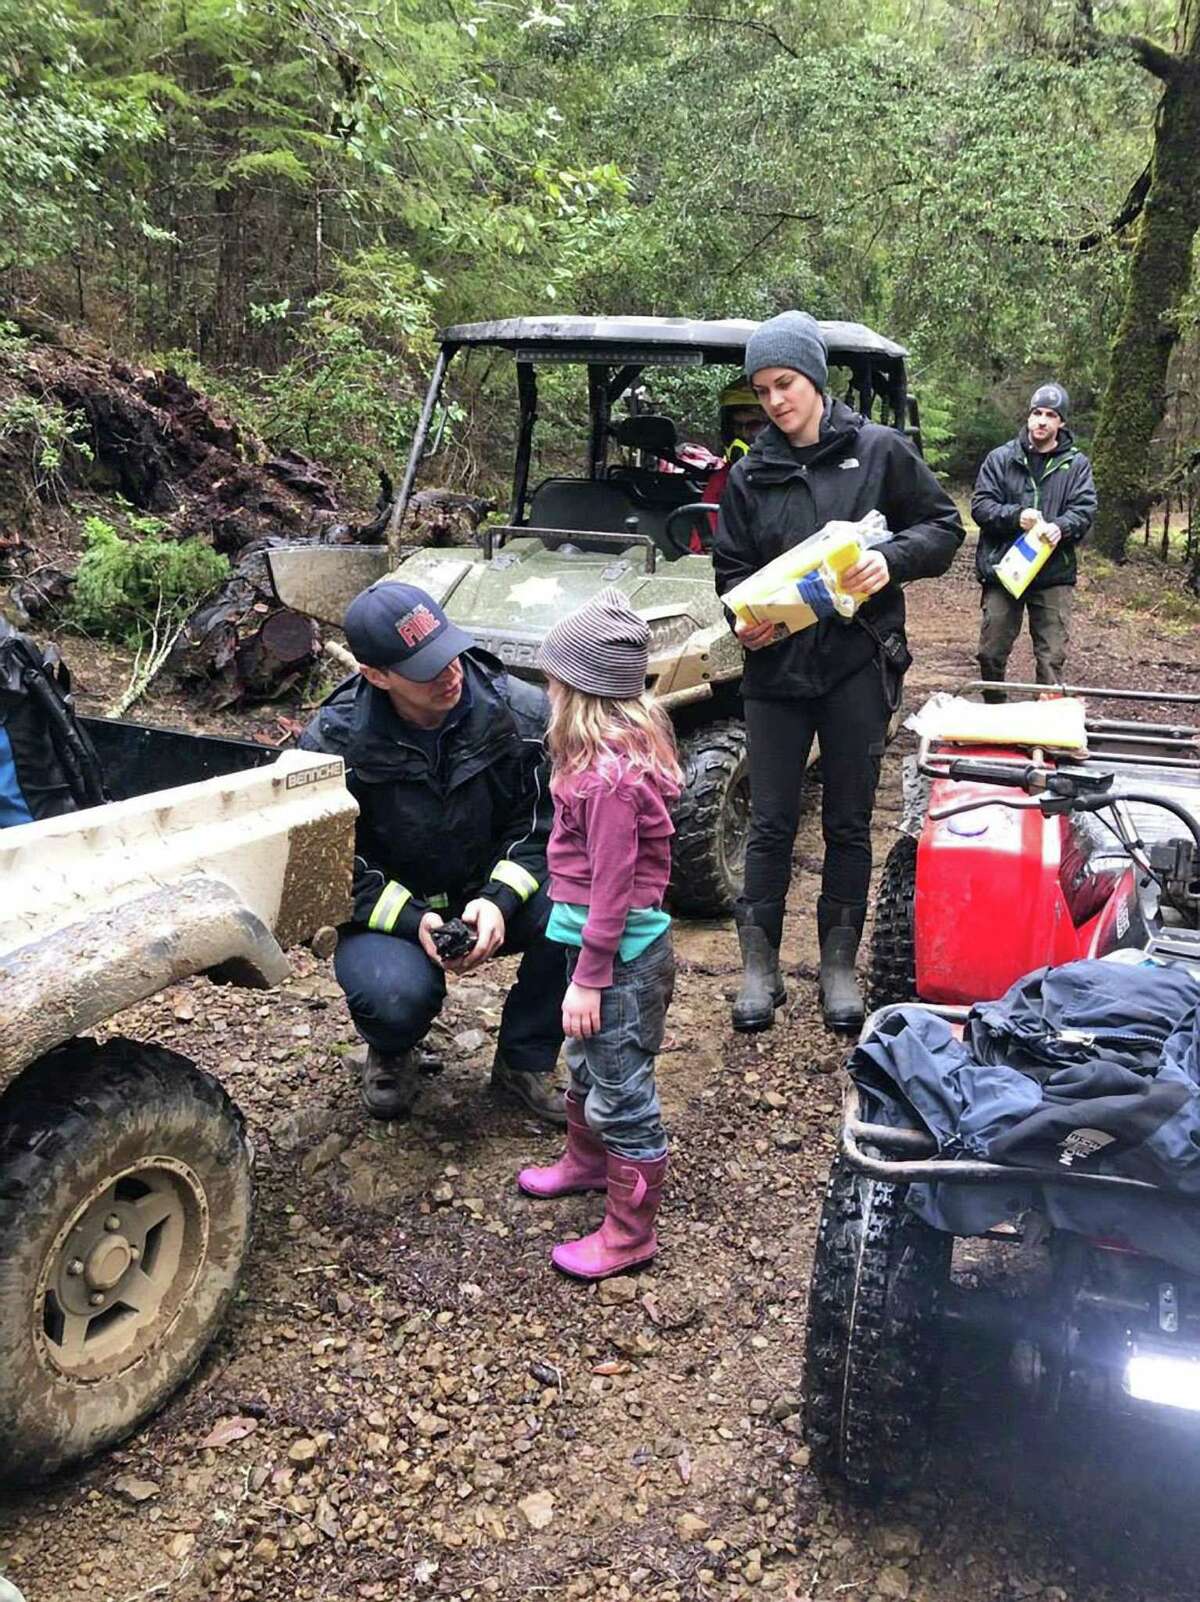 Caroline Carrico is assisted by first responders after she and her sister were found by volunteer firefighters in a park 1.4 miles from their home in Humboldt County. They sisters had been missing for nearly two days. Photo by Humboldt County Sheriff's Office